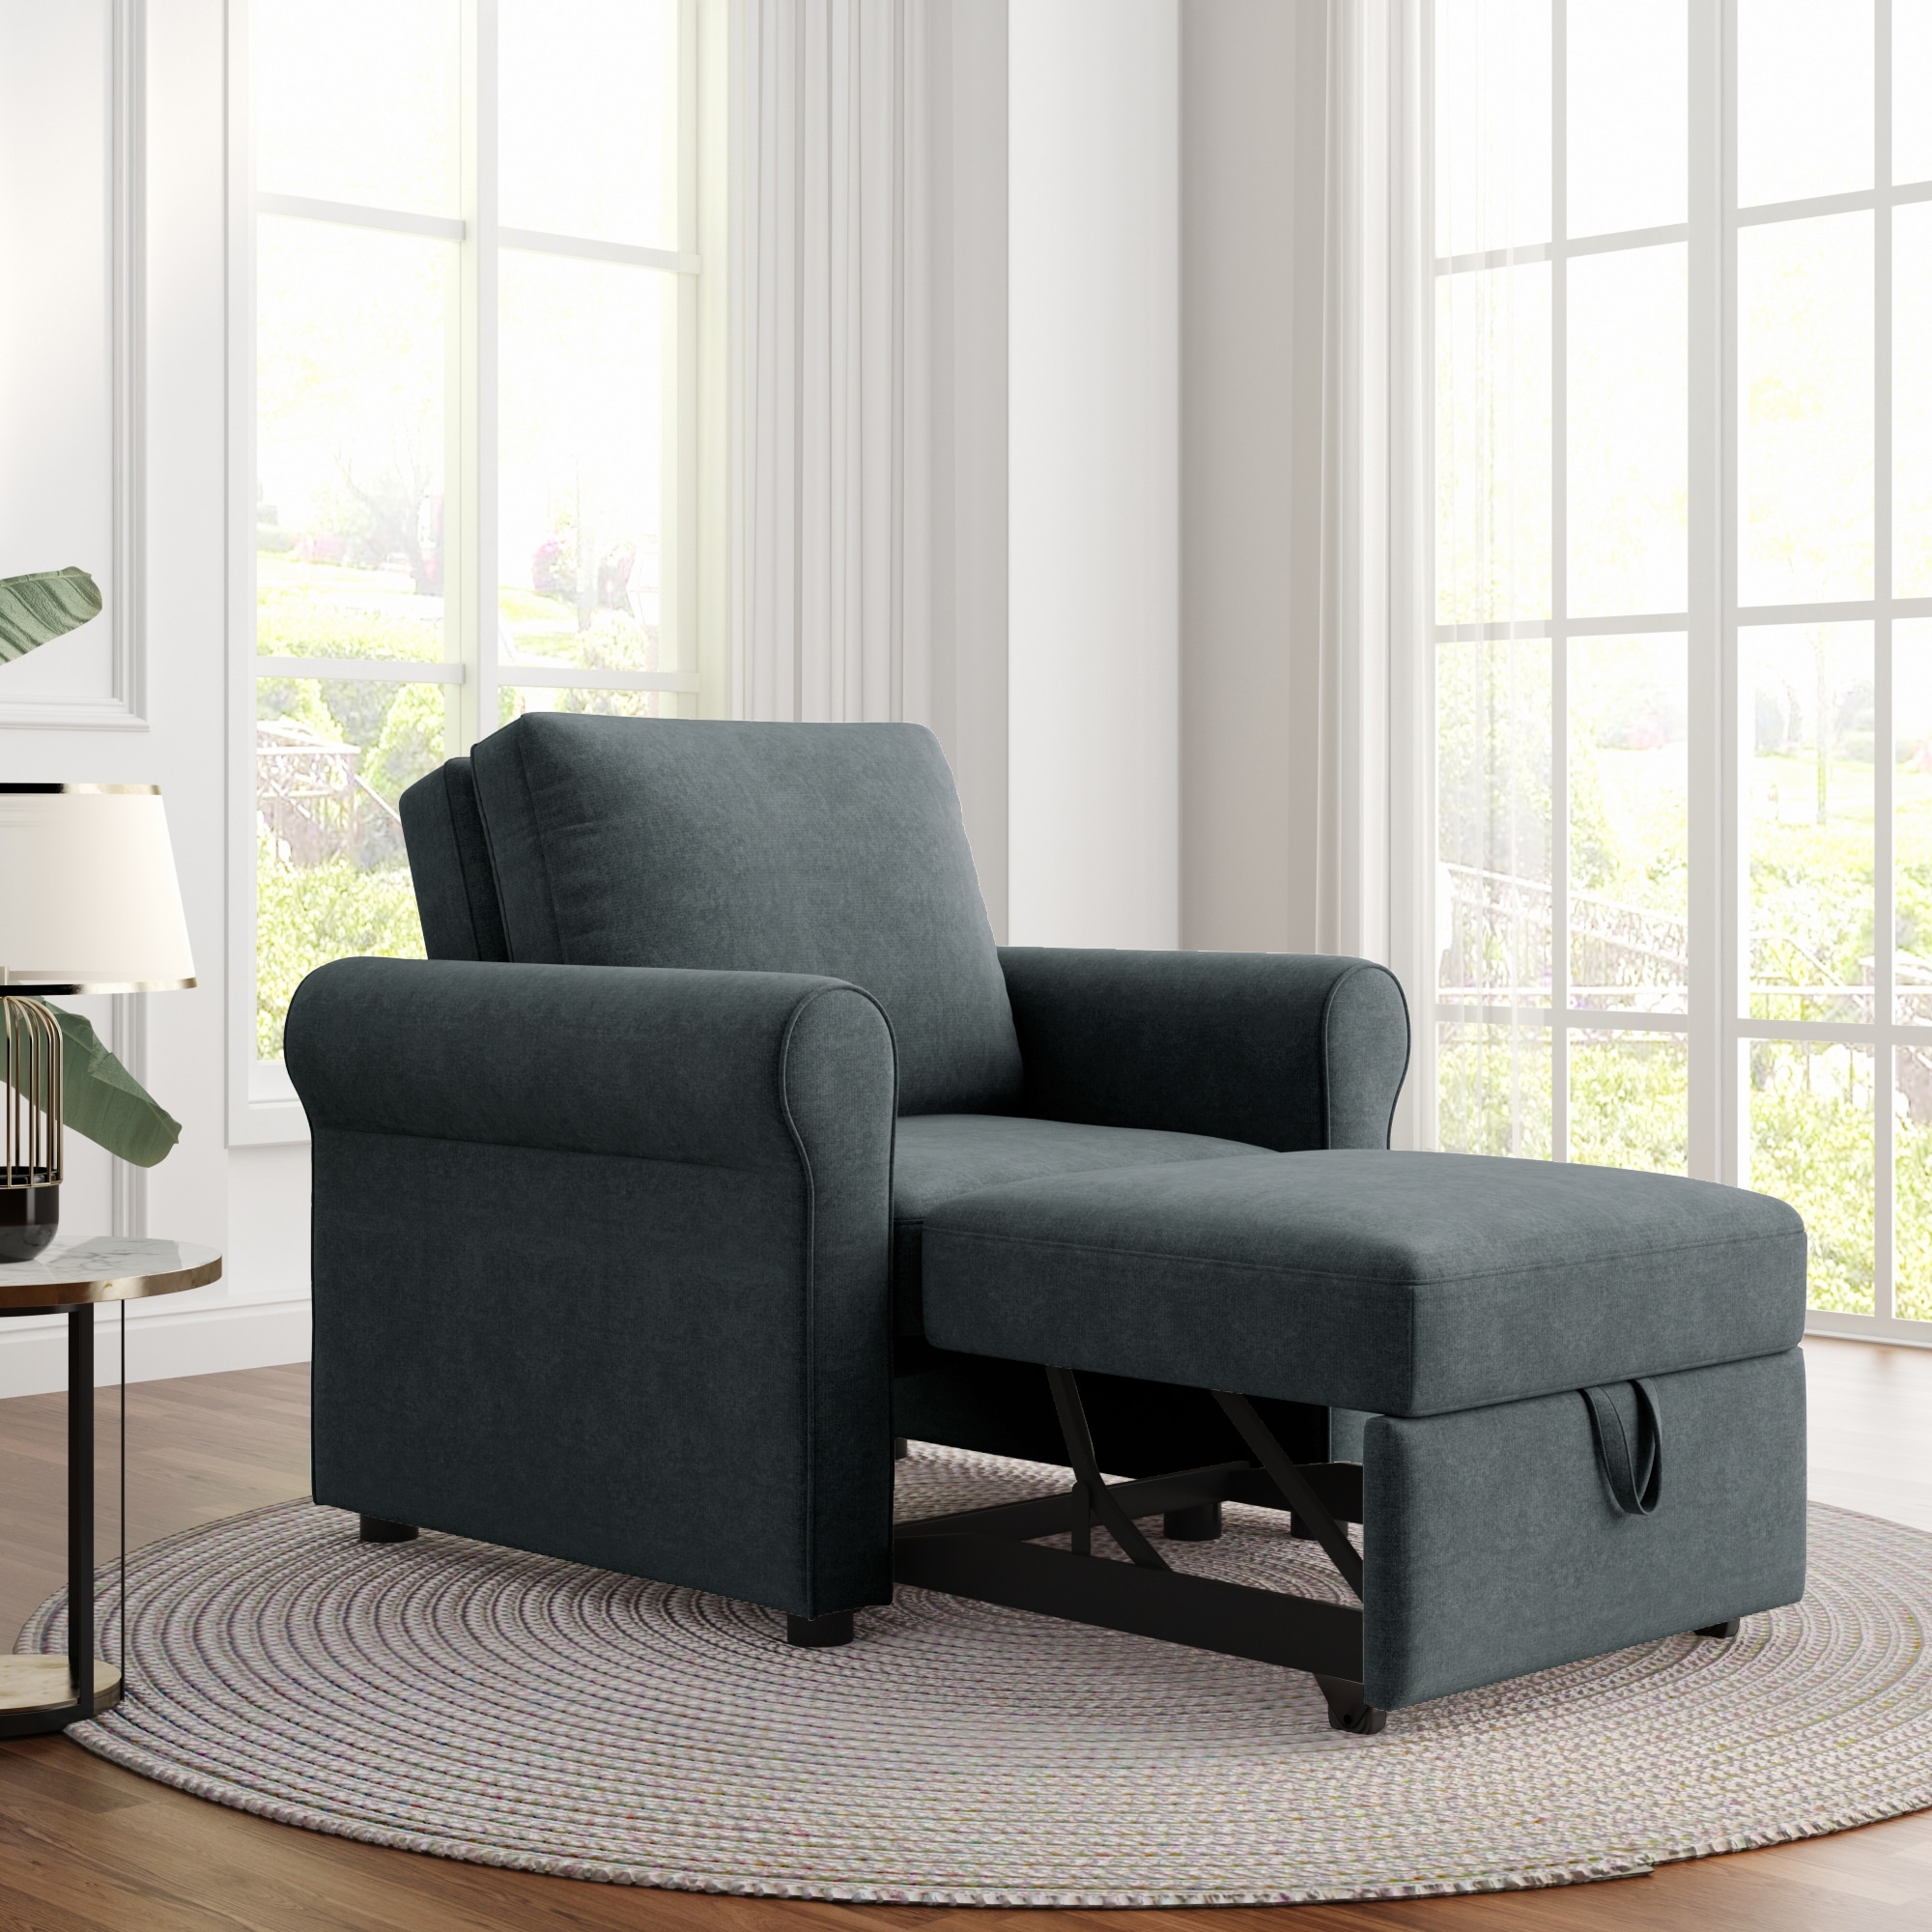 Livingroom Accent Chair 3-in-1 Sofa Bed Chair Convertible Sleeper